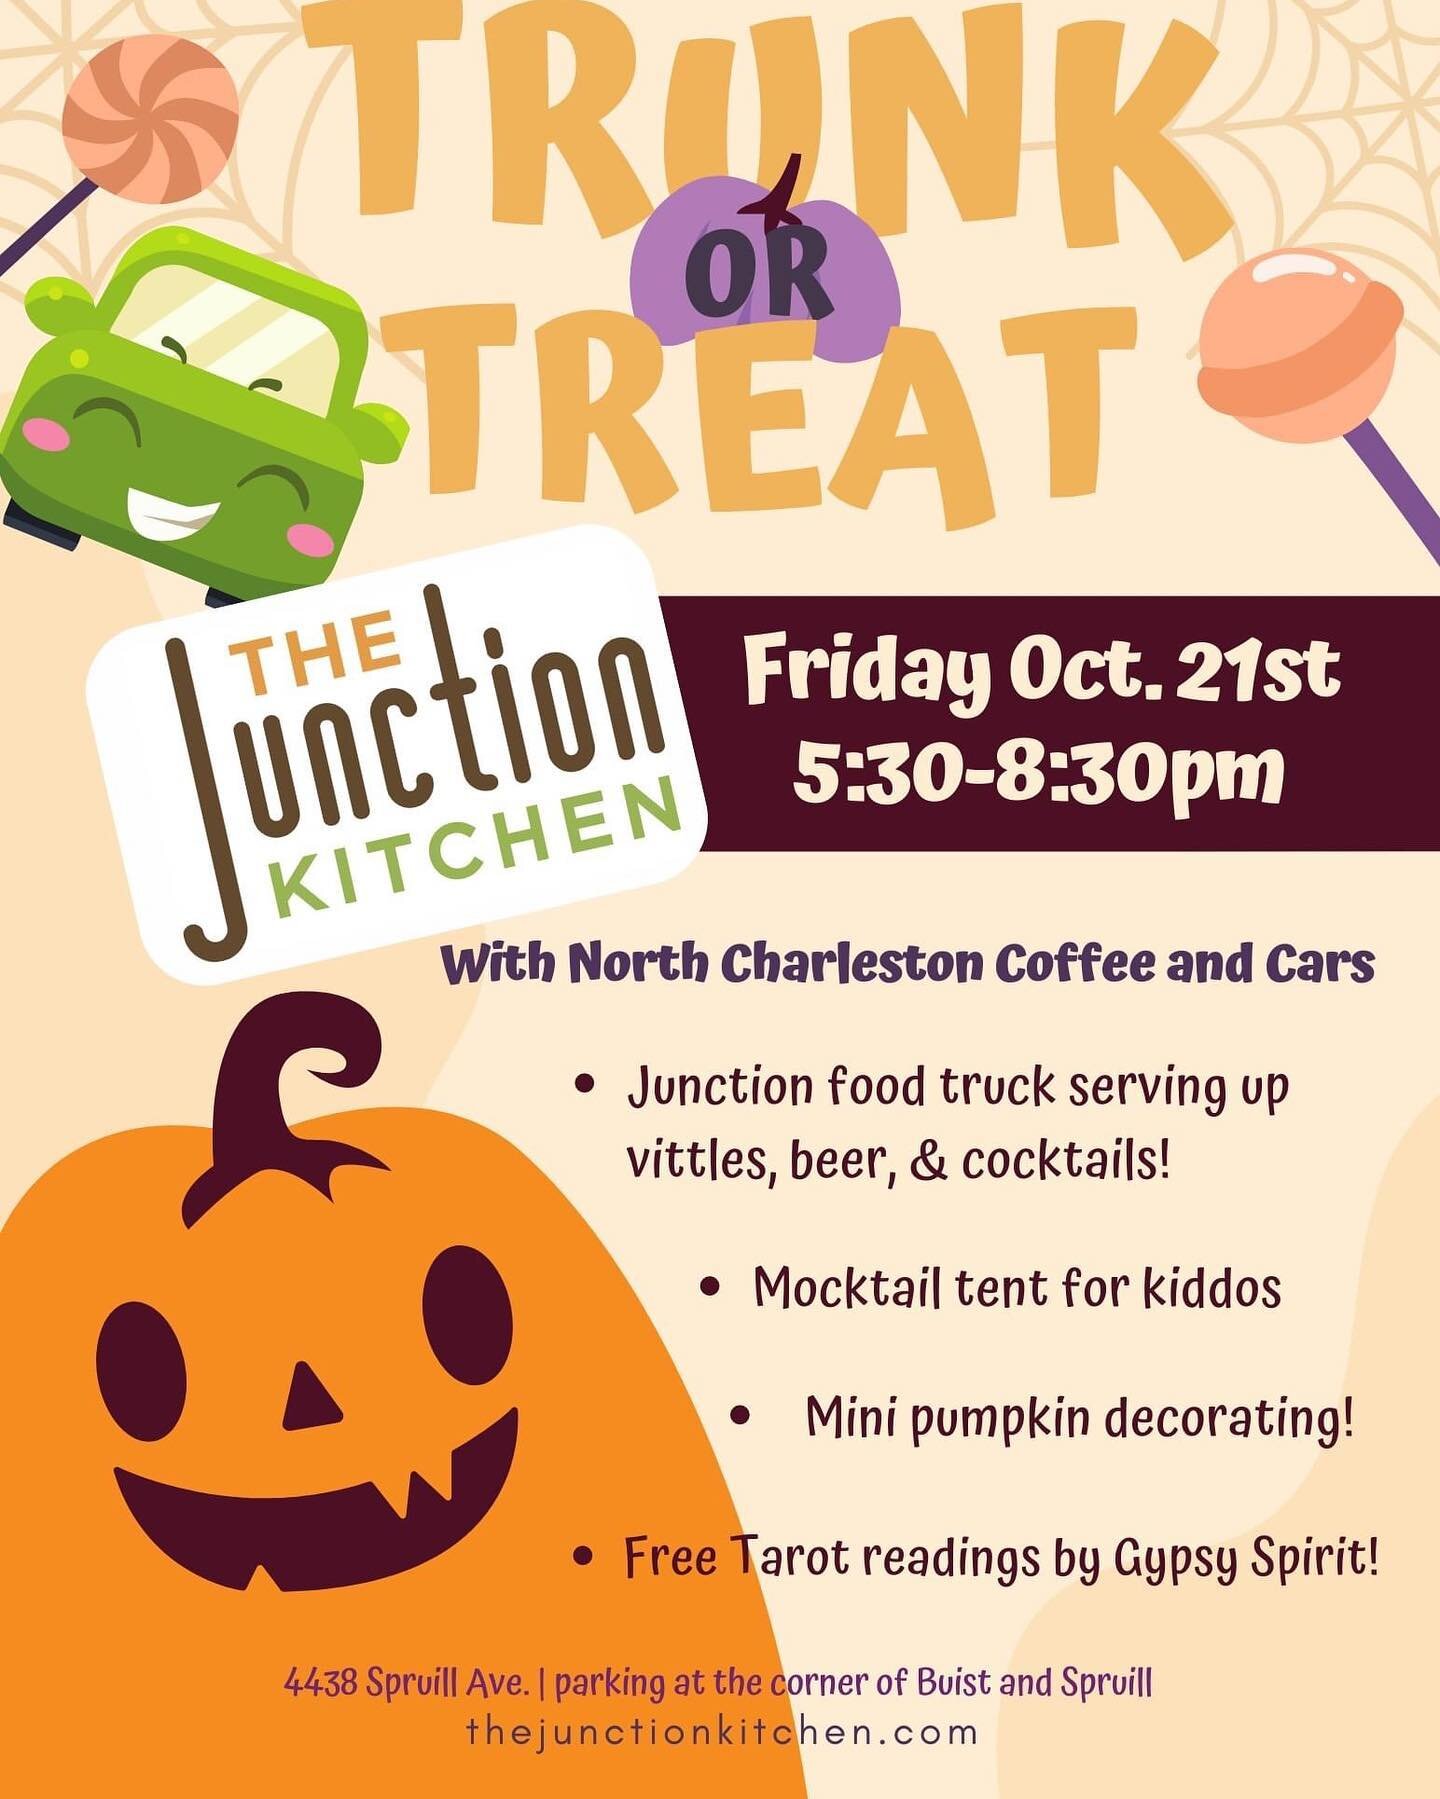 🎃 Trunk or Treat 🎃 @thejunctionkitchen October 21 5:30-8:30pm